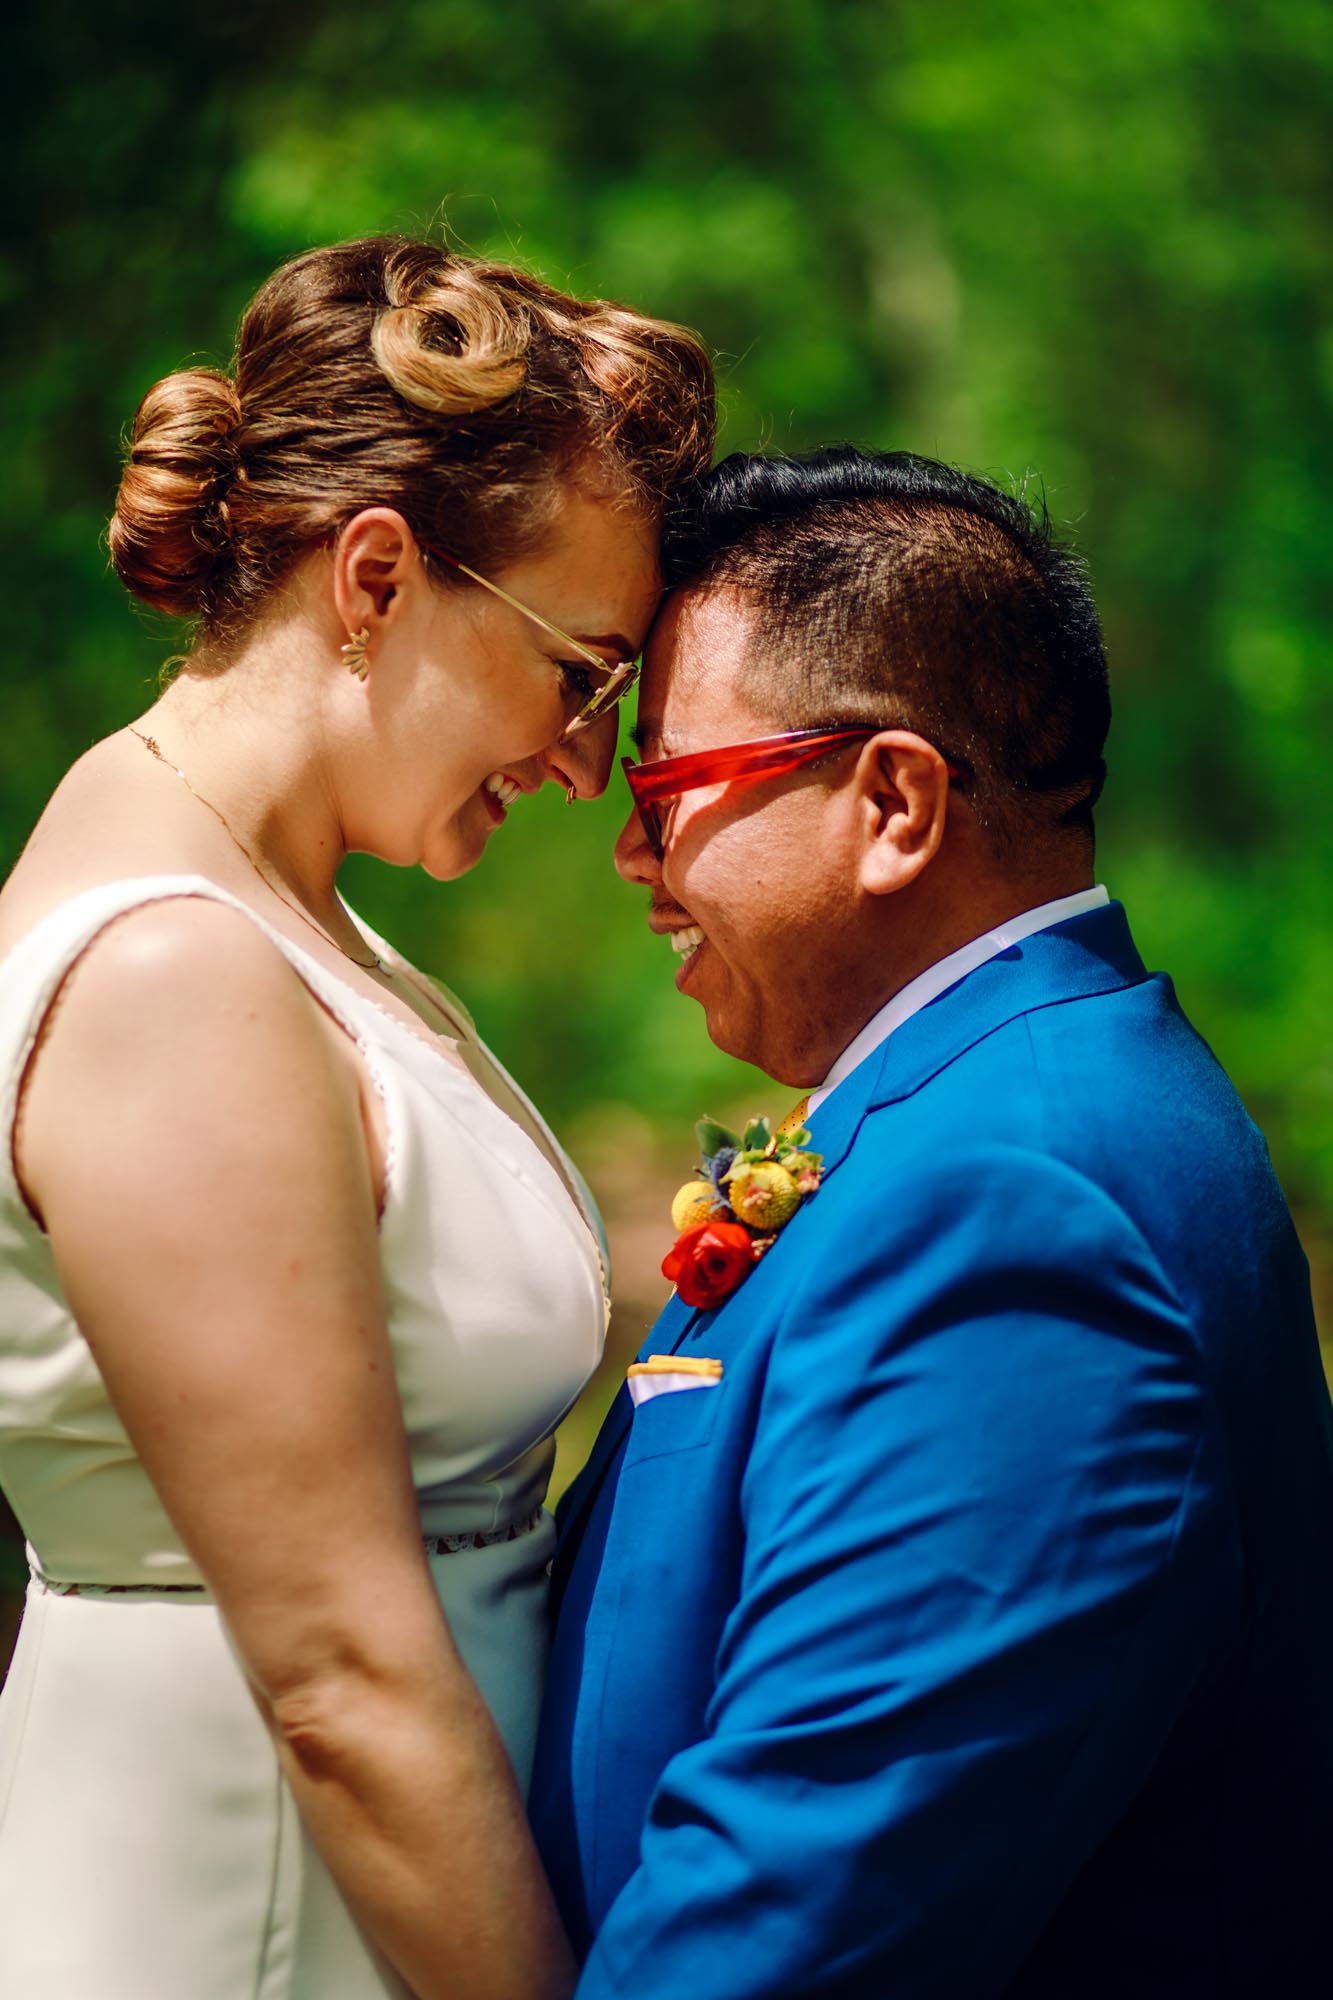 A colorful Wisconsin wedding filled with love and gender inclusivity | Tuan B & Co | Featured on Equally Wed, the leading LGBTQ+ wedding magazine